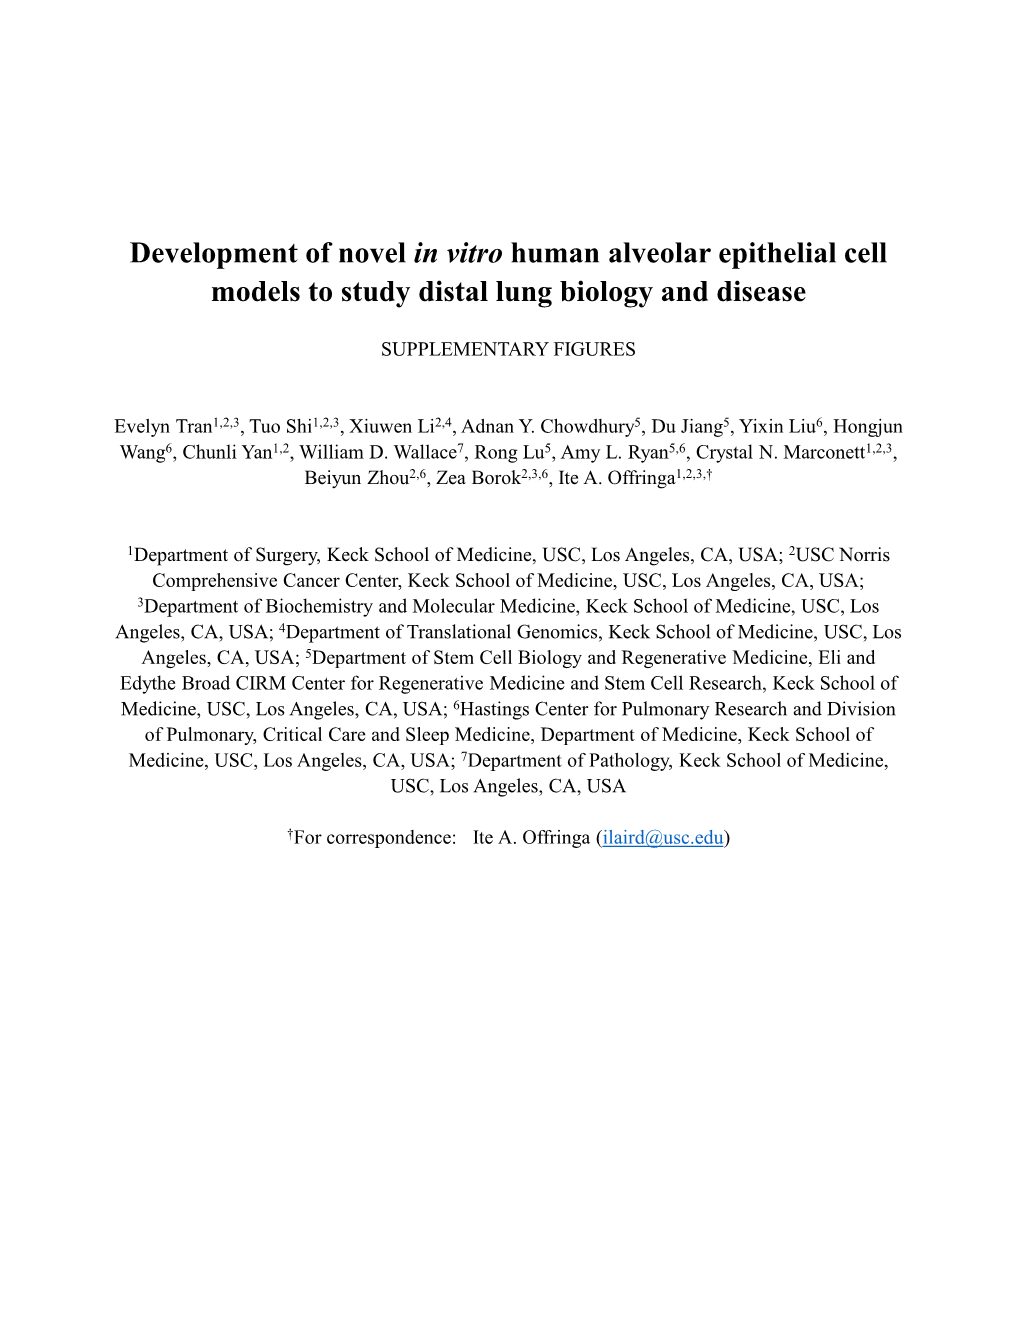 Development of Novel in Vitro Human Alveolar Epithelial Cell Models to Study Distal Lung Biology and Disease